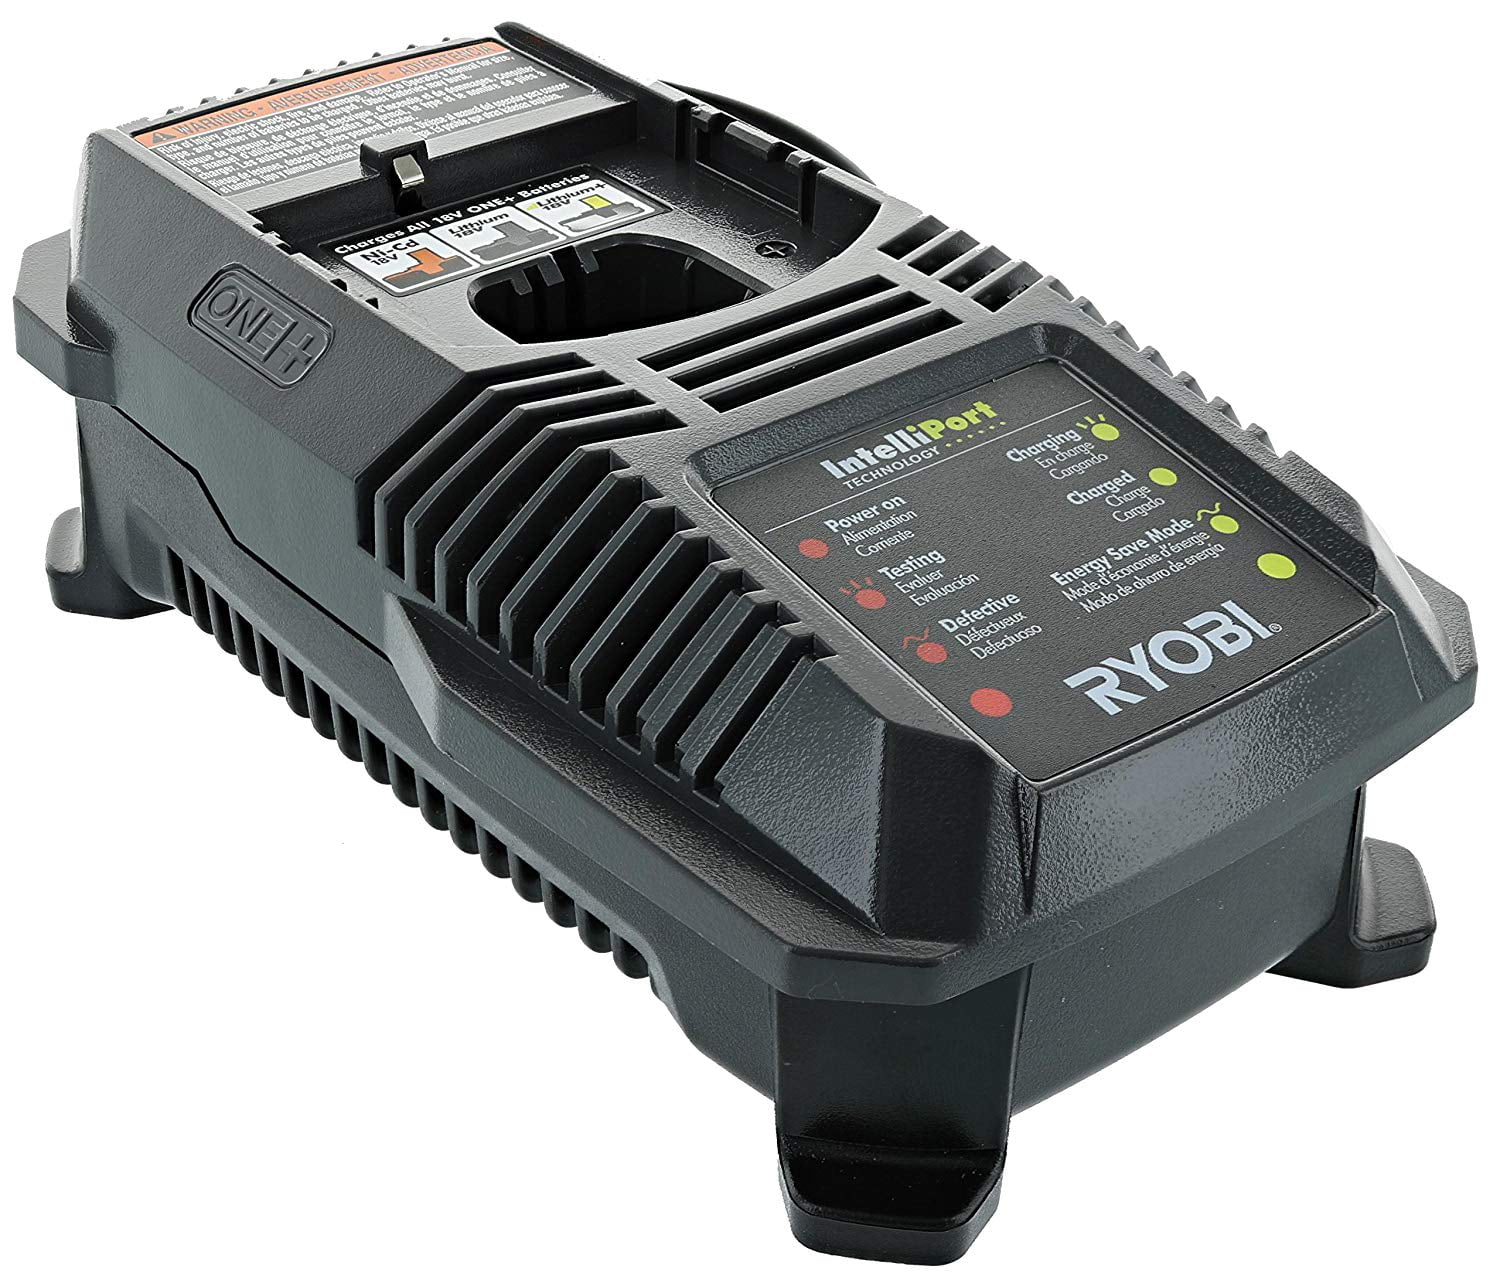 Ryobi 18 Volt P117 Dual Chemistry Lithium Ion Battery Charger